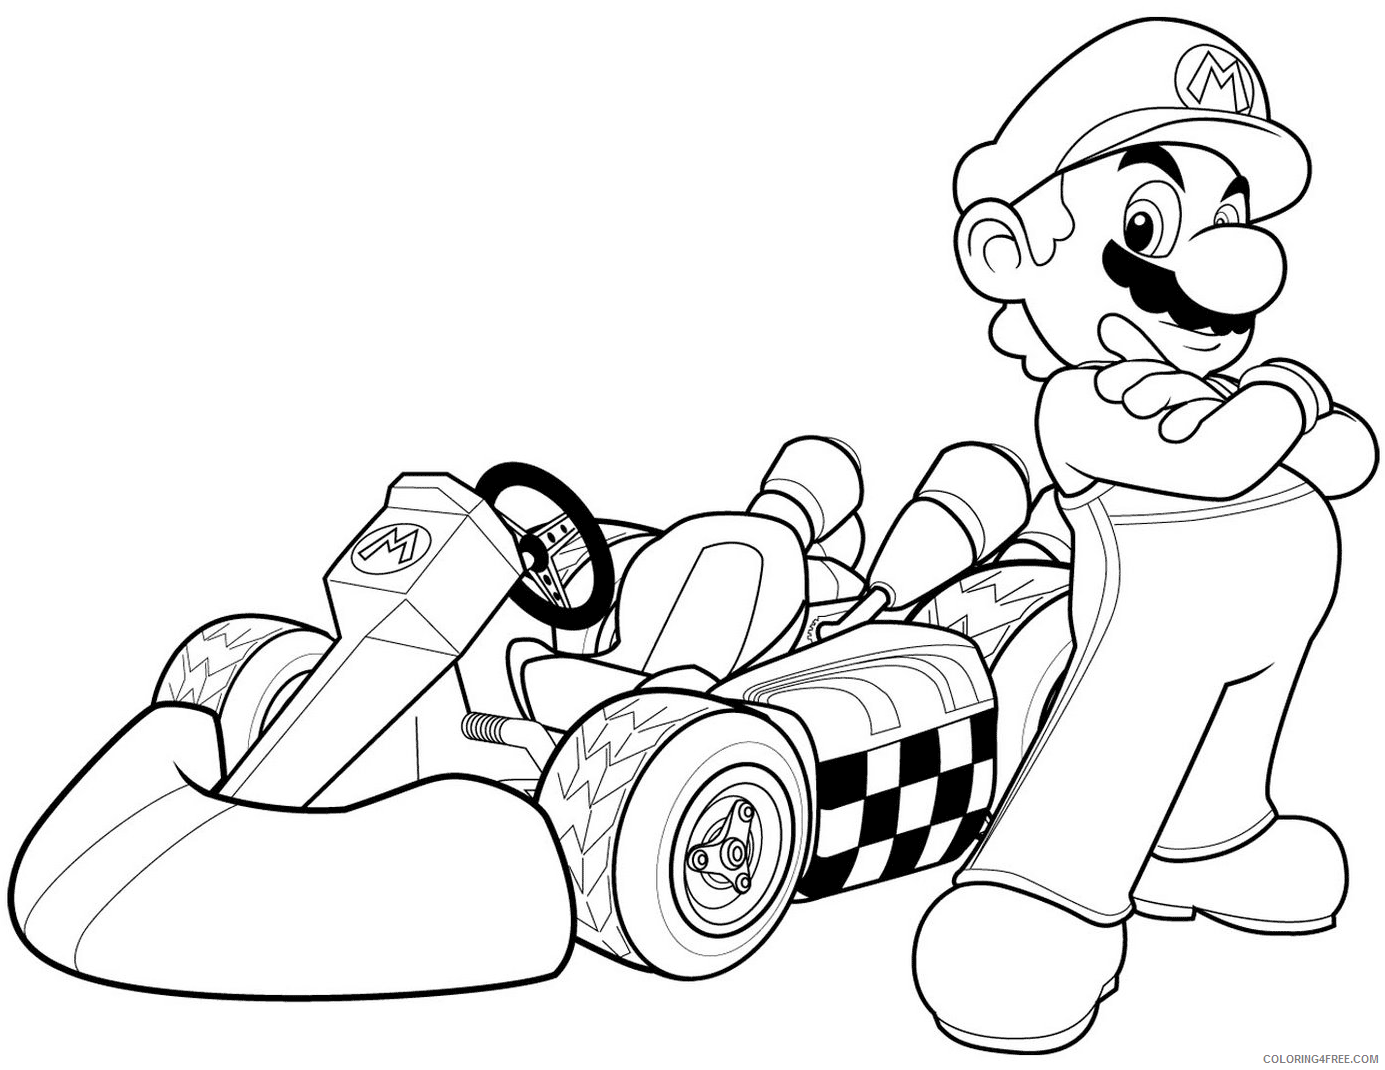 Super Mario Coloring Pages Games mario kart wii Printable 2021 1146 Coloring4free